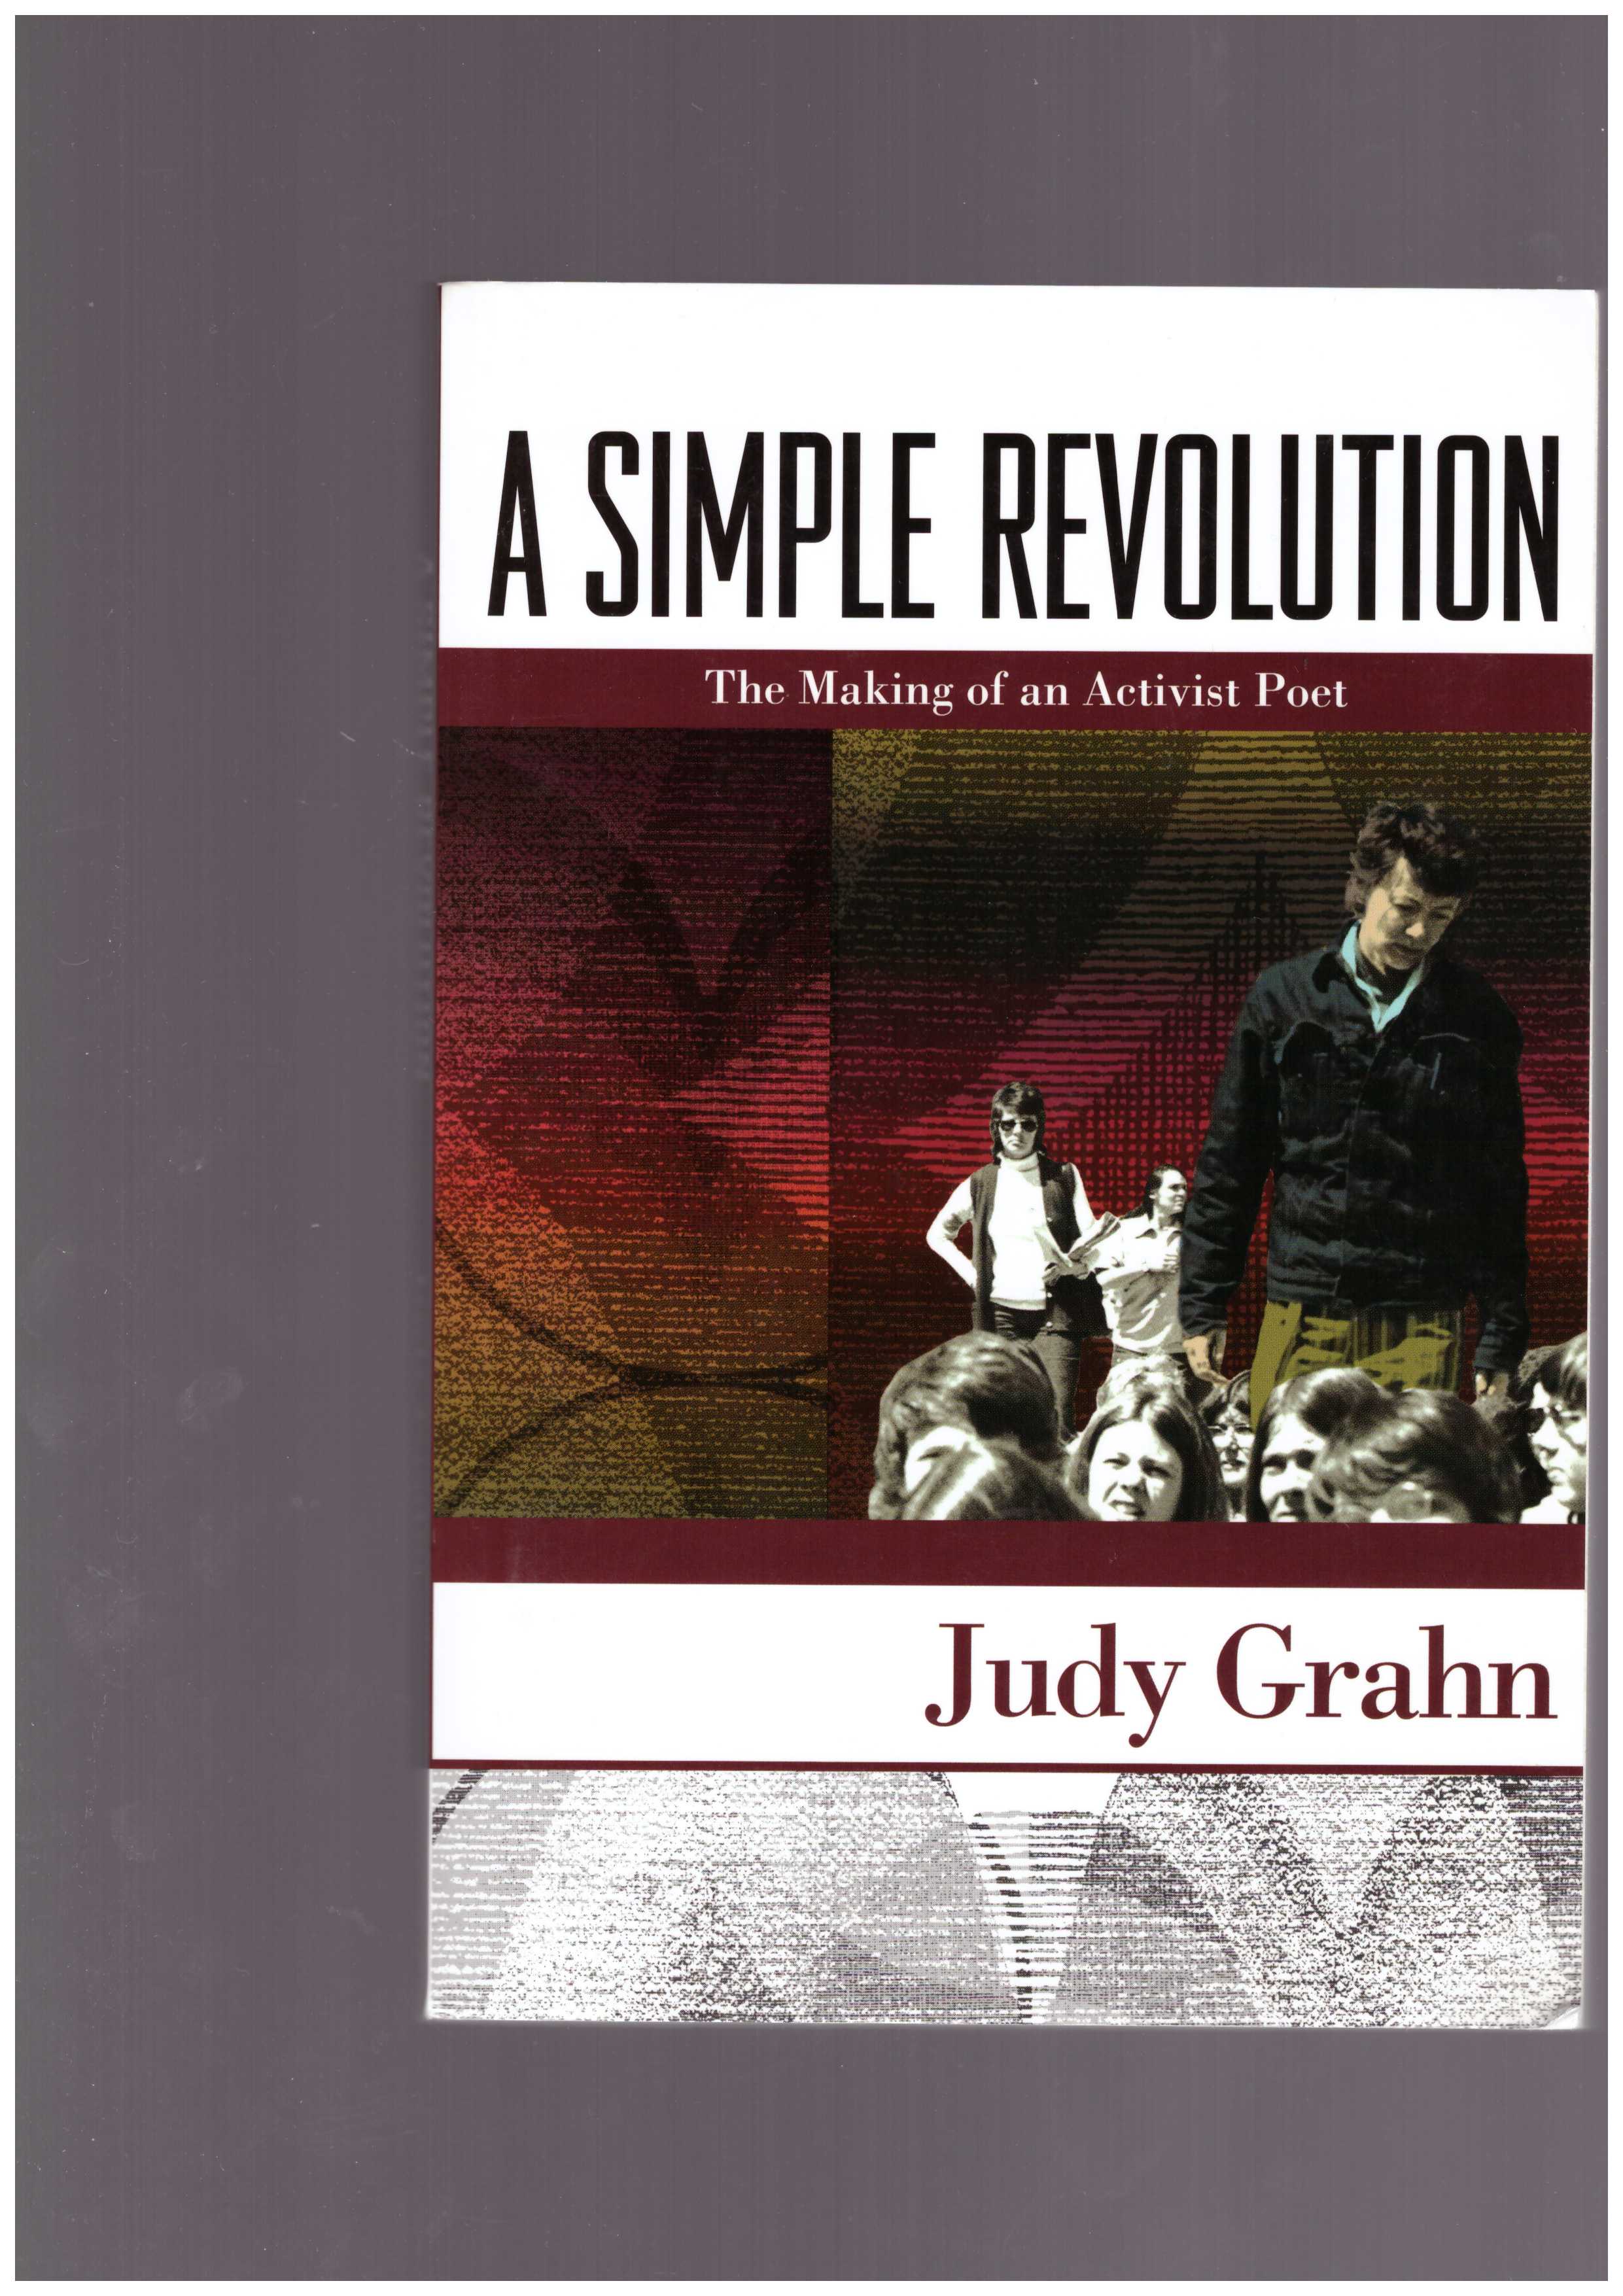 GRAHN, Judy - A Simple Revolution: The Making of an Activist Poet